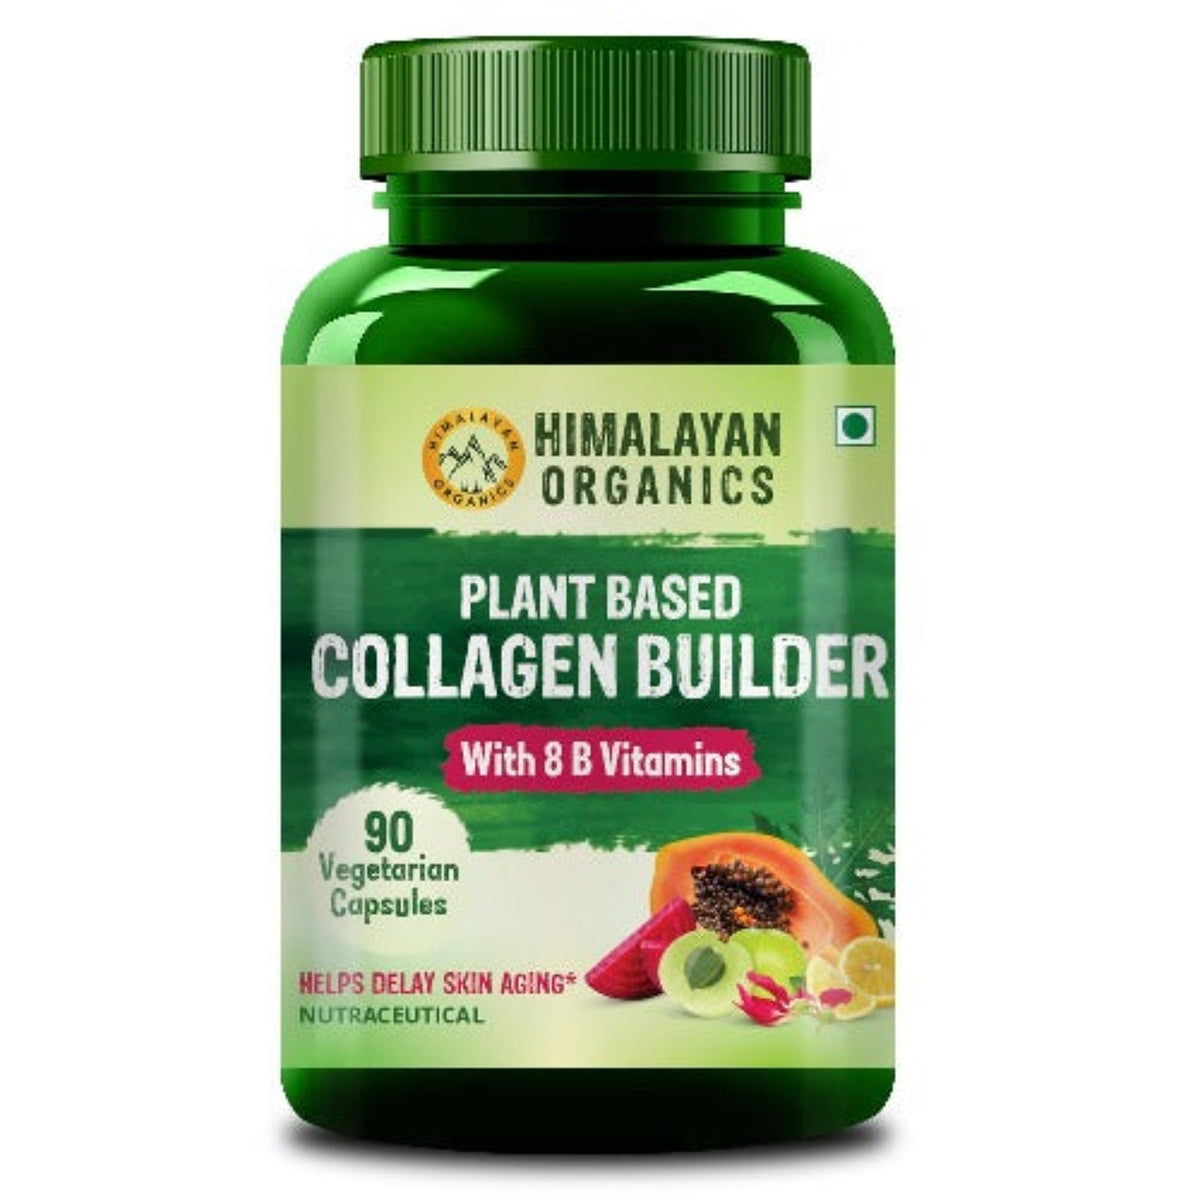 Himalayan Organics Plant Based Collagen Builder For Hair And Skin With Biotin And Vitamin C 90 Vegetarian Capsules